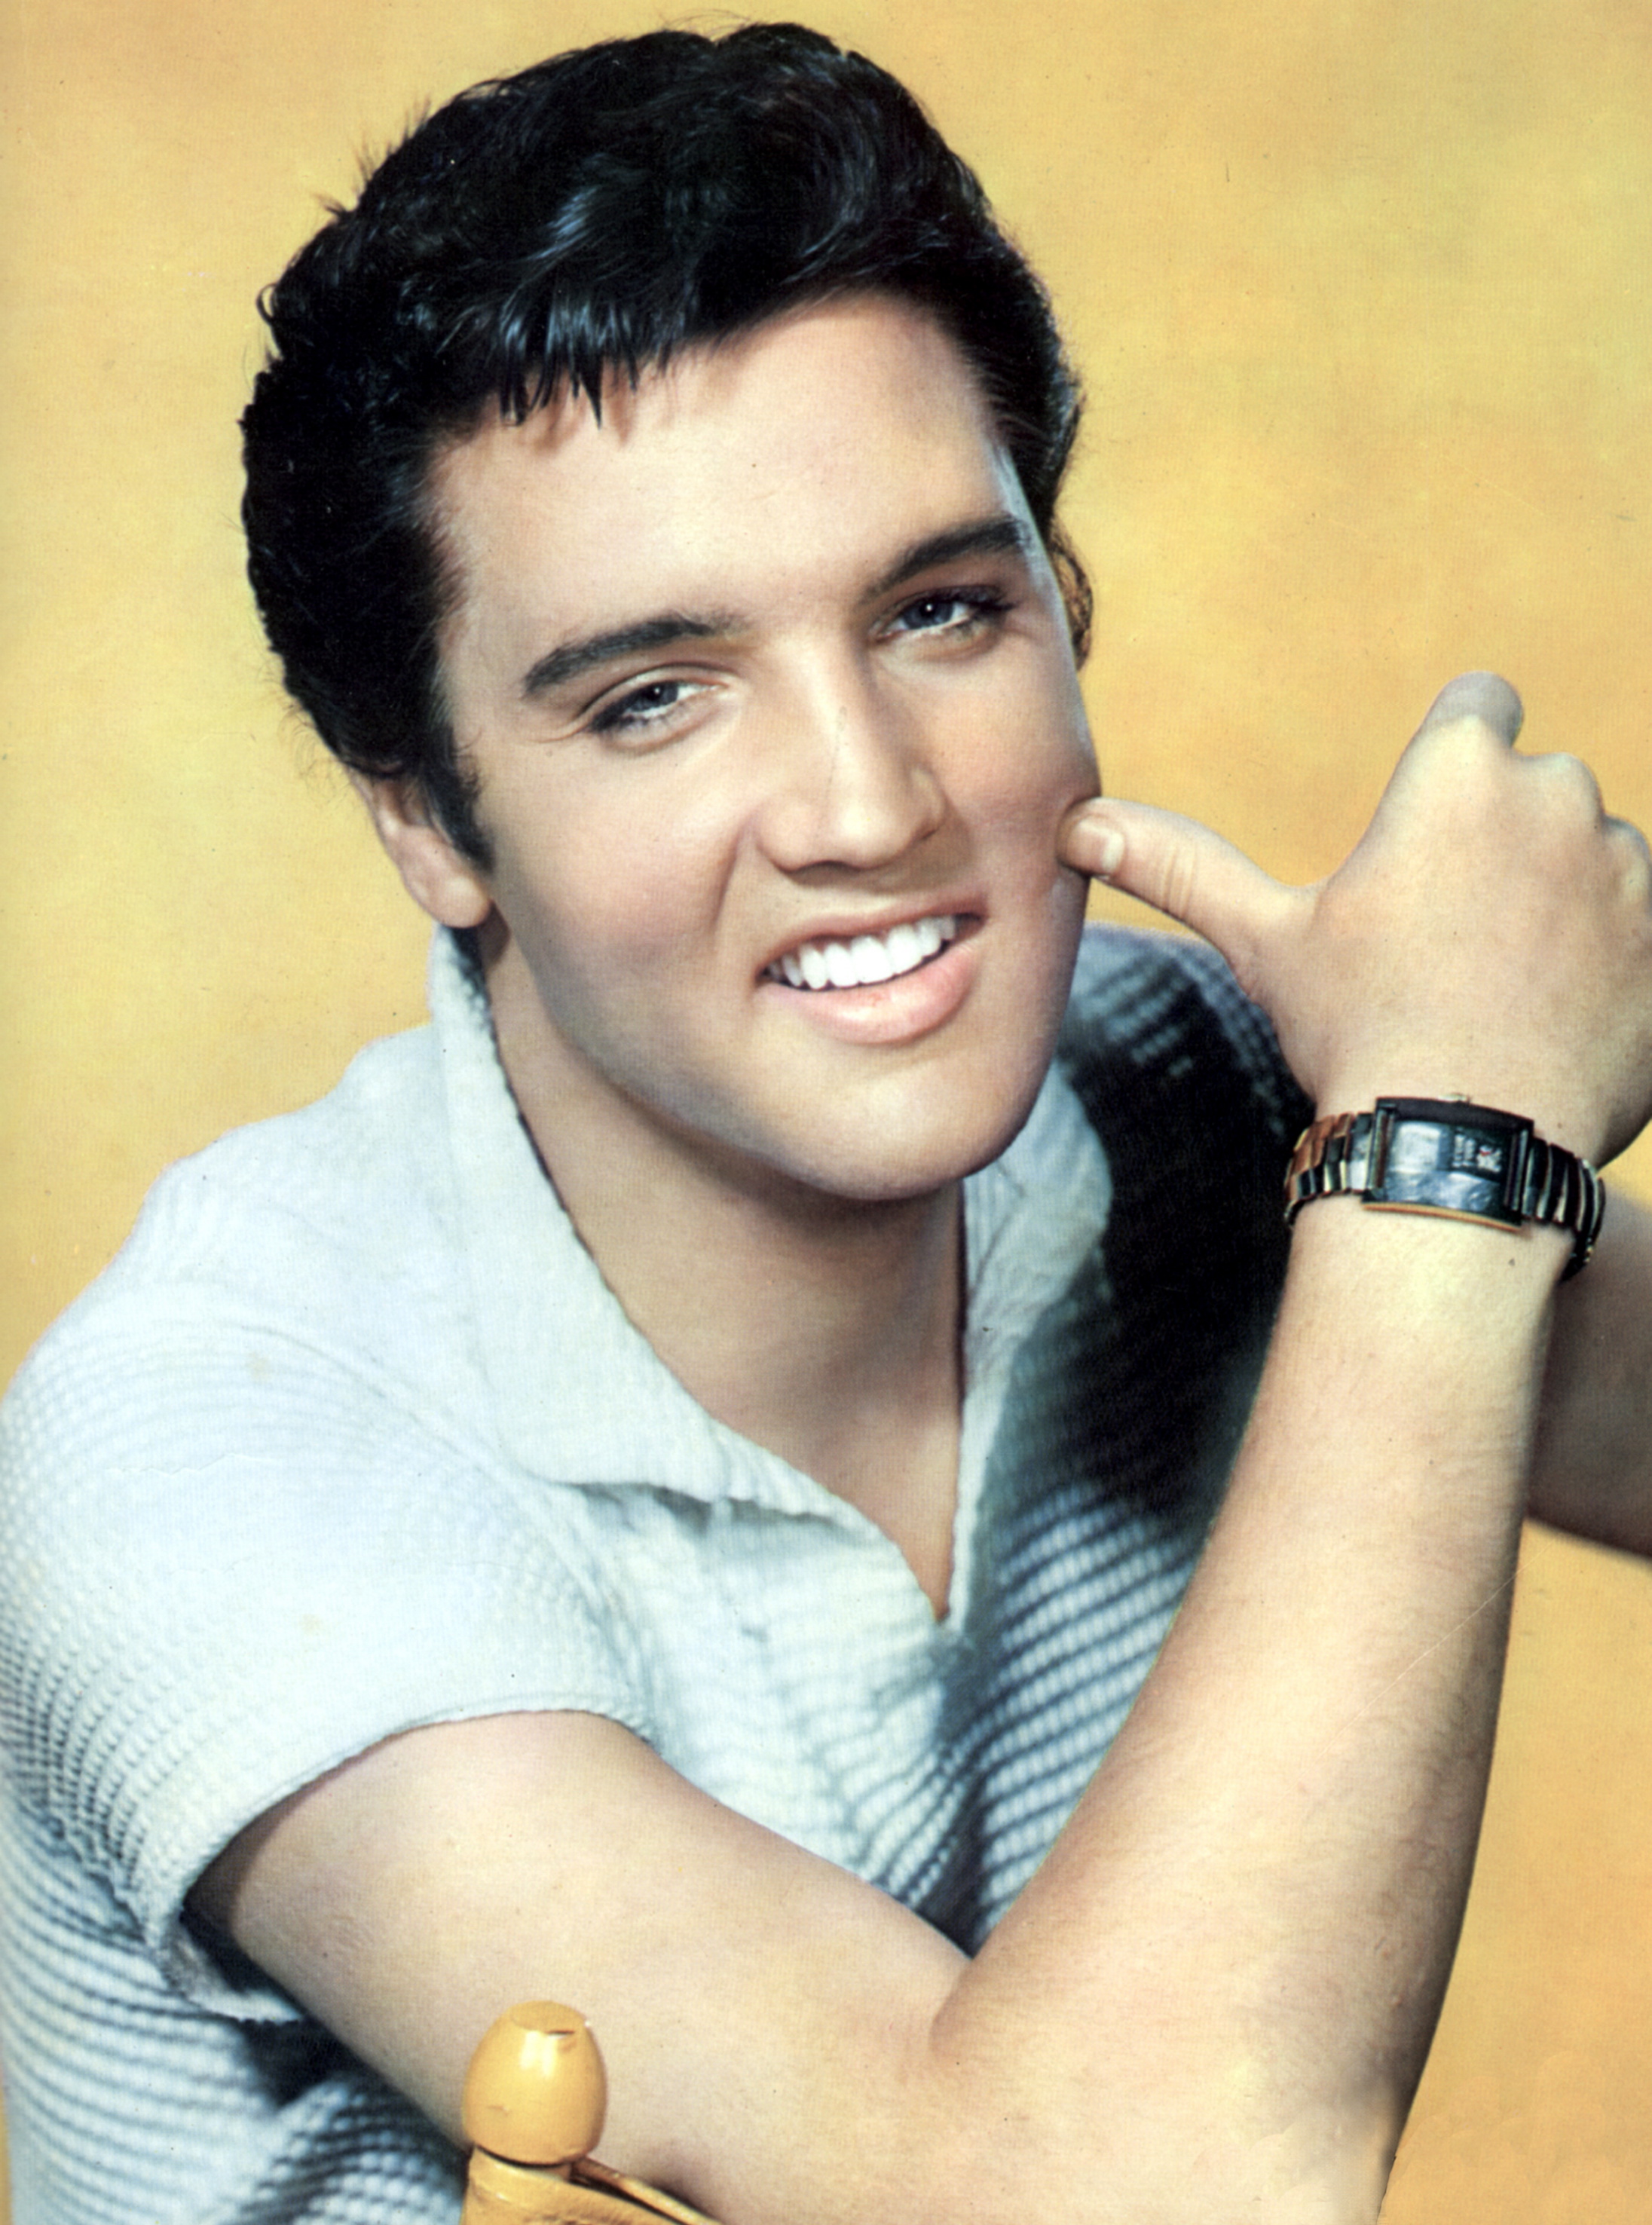 Elvis Presley in the late 1950s | Source: Getty Images